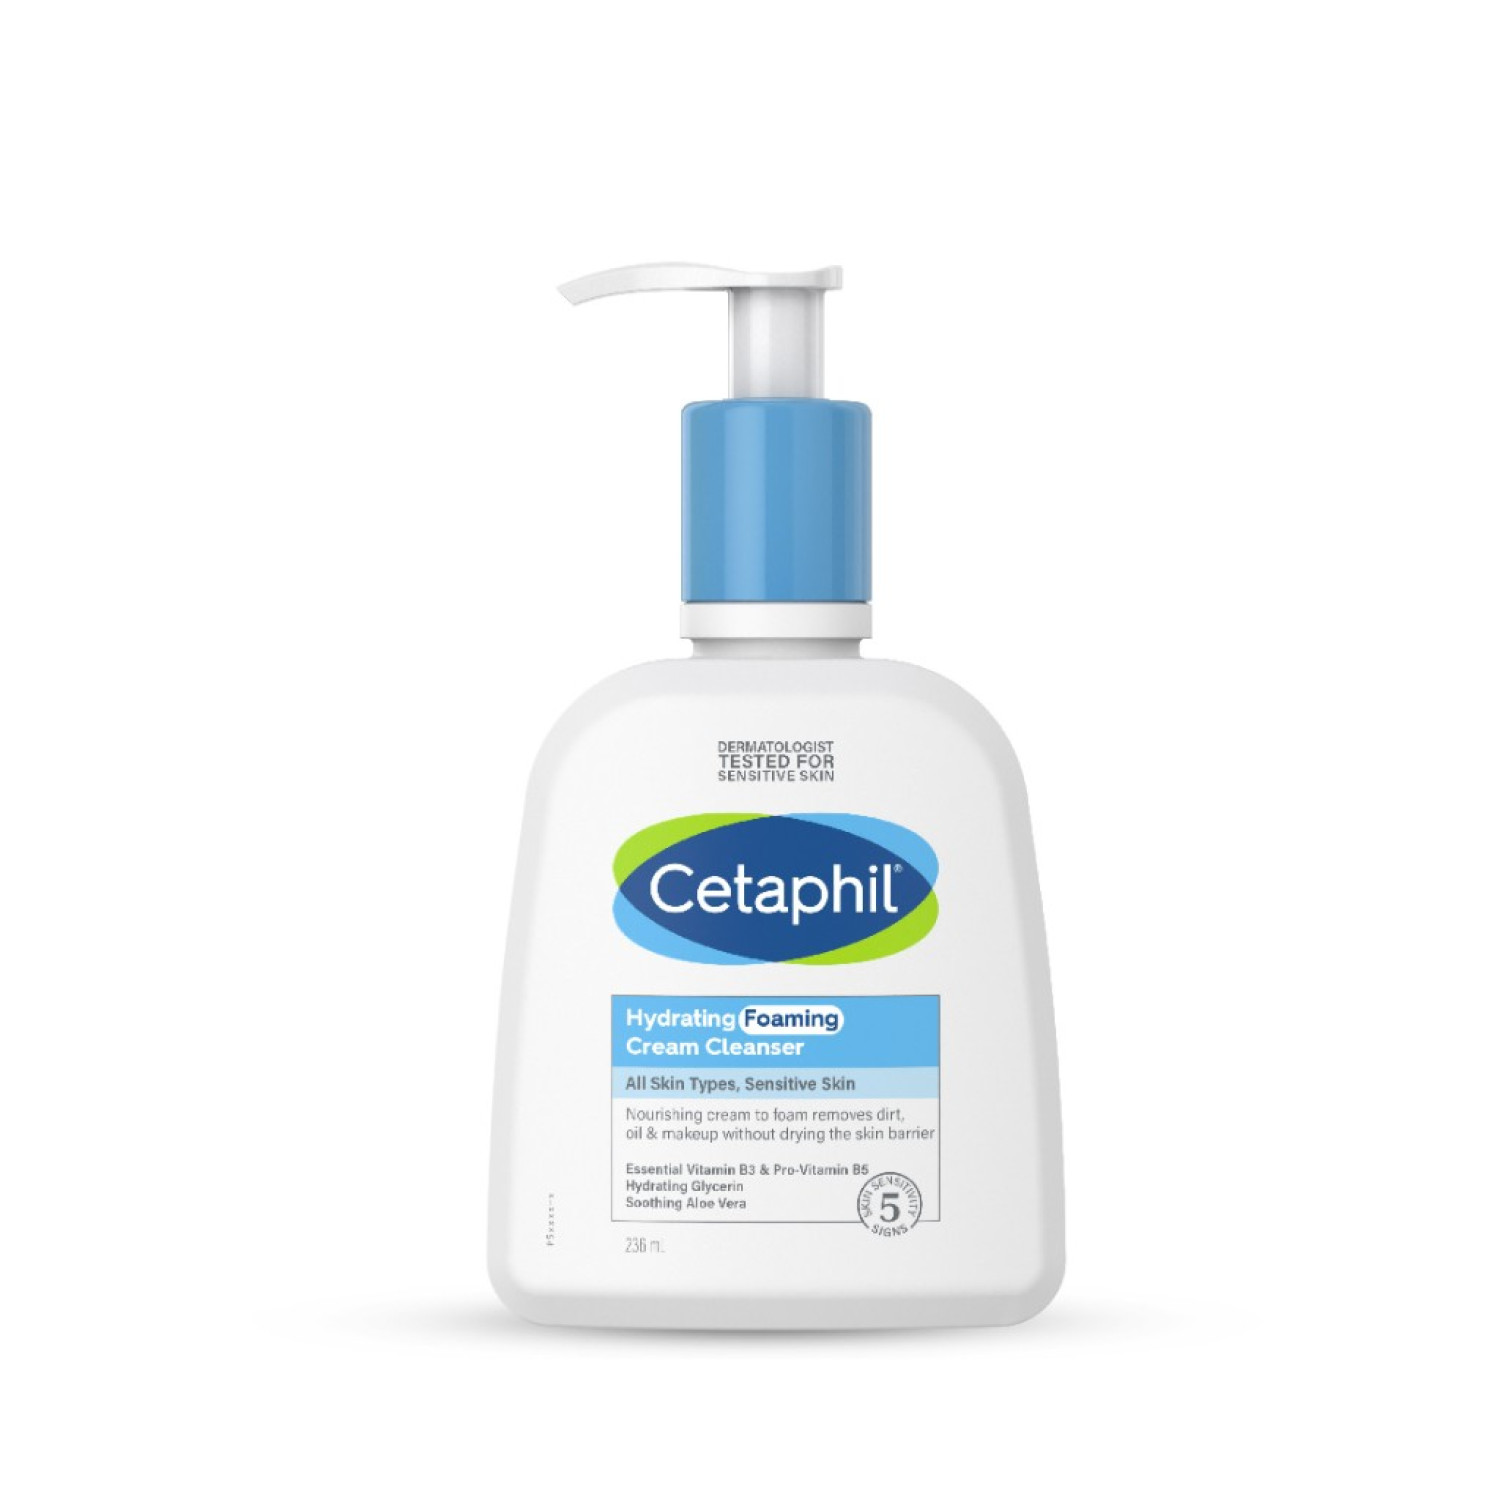 Cetaphil Cetaphil Hydrating Foaming Creamy Cleanser